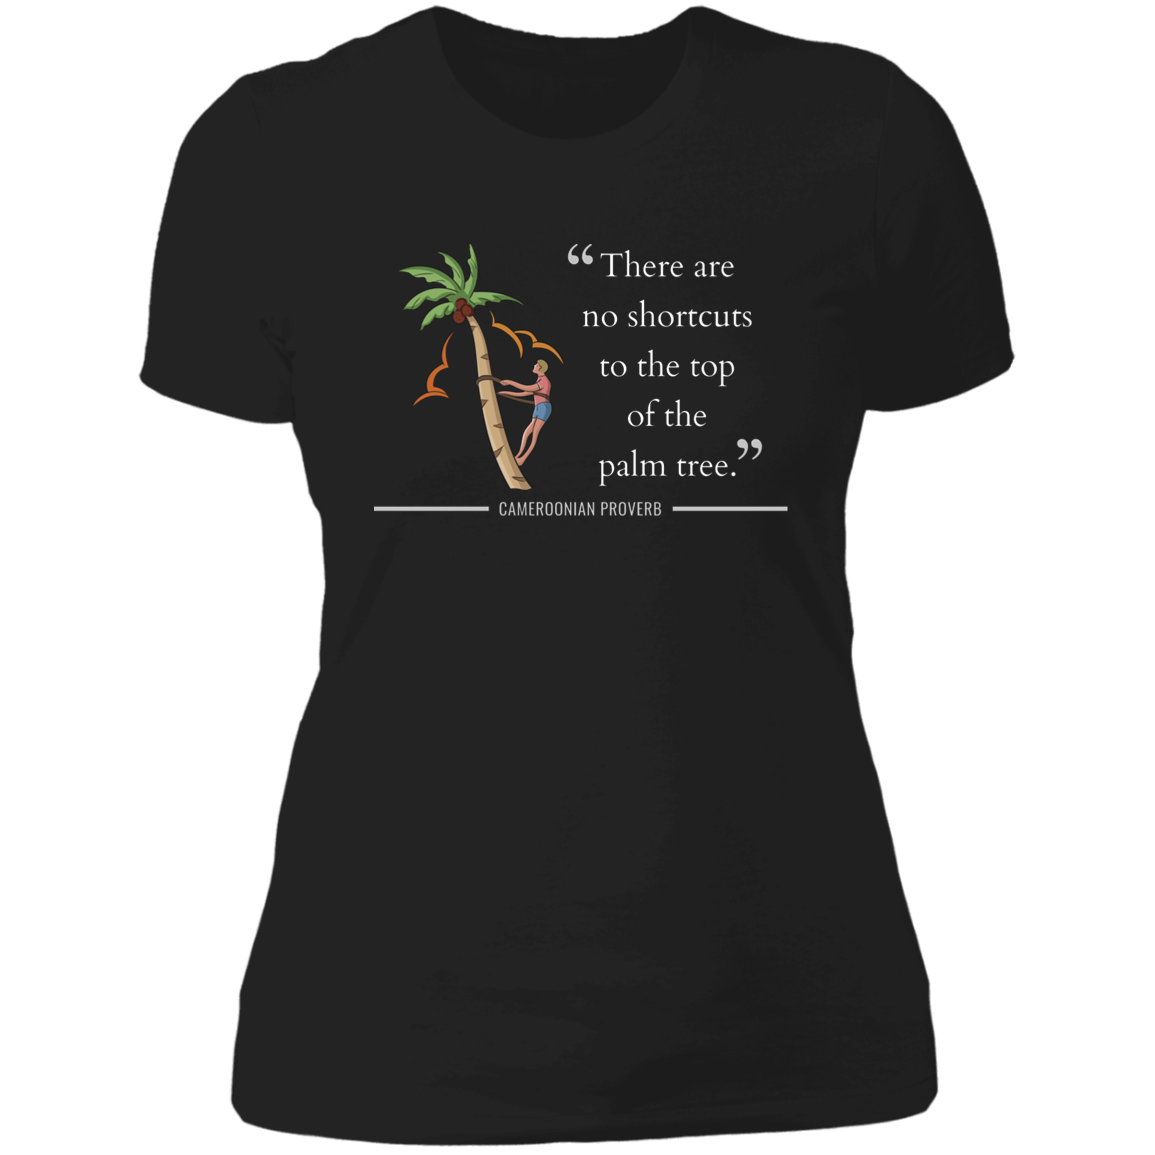 There Are No Shortcuts To Top of Palm Tree Women's Classic T-Shirt